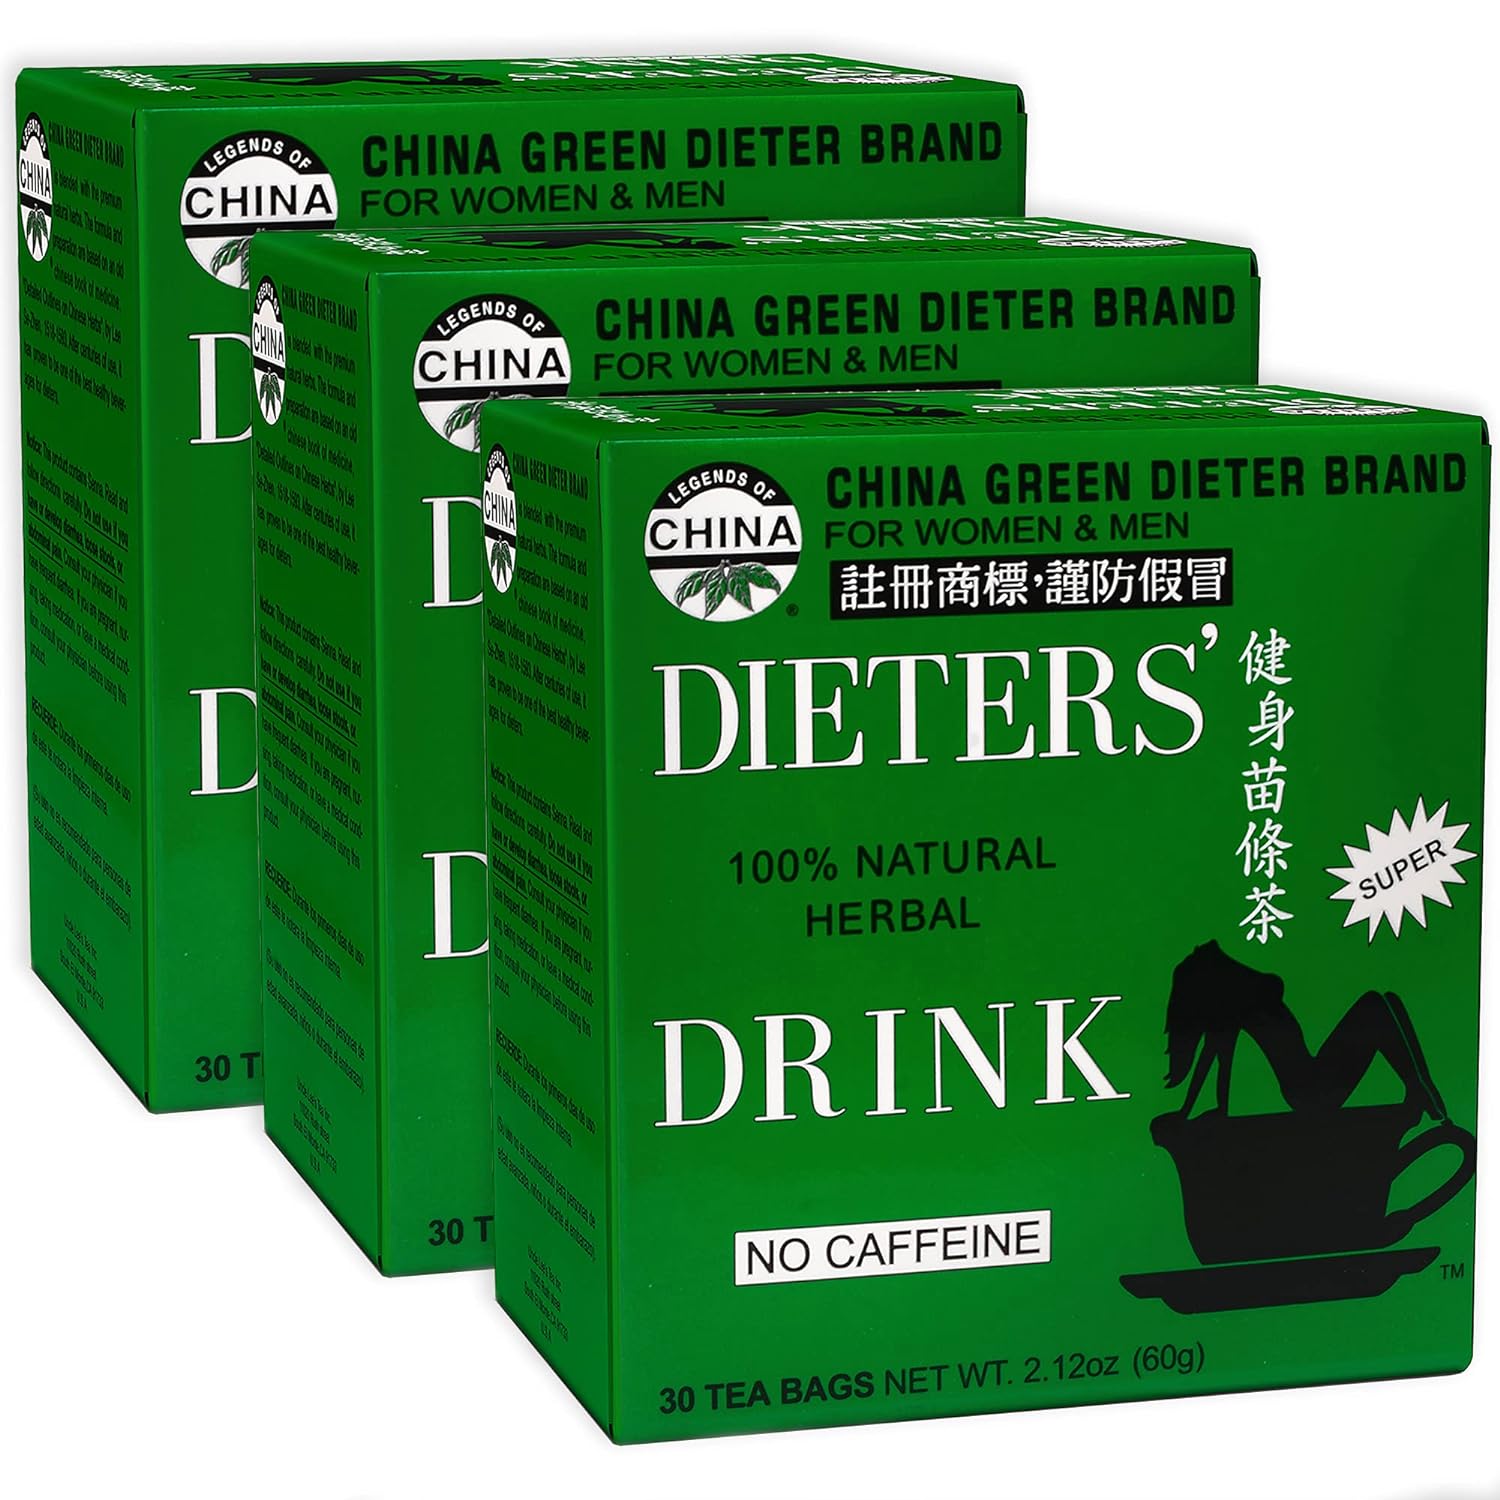 China Green Dieters Tea by Uncle Lee - Detox Tea with Senna Laxative, Constipation Relief for Adults, Supports A Healthy Weight, Caffeine-Free Herbal Tea Bags, 30 Count (Pack of 3)